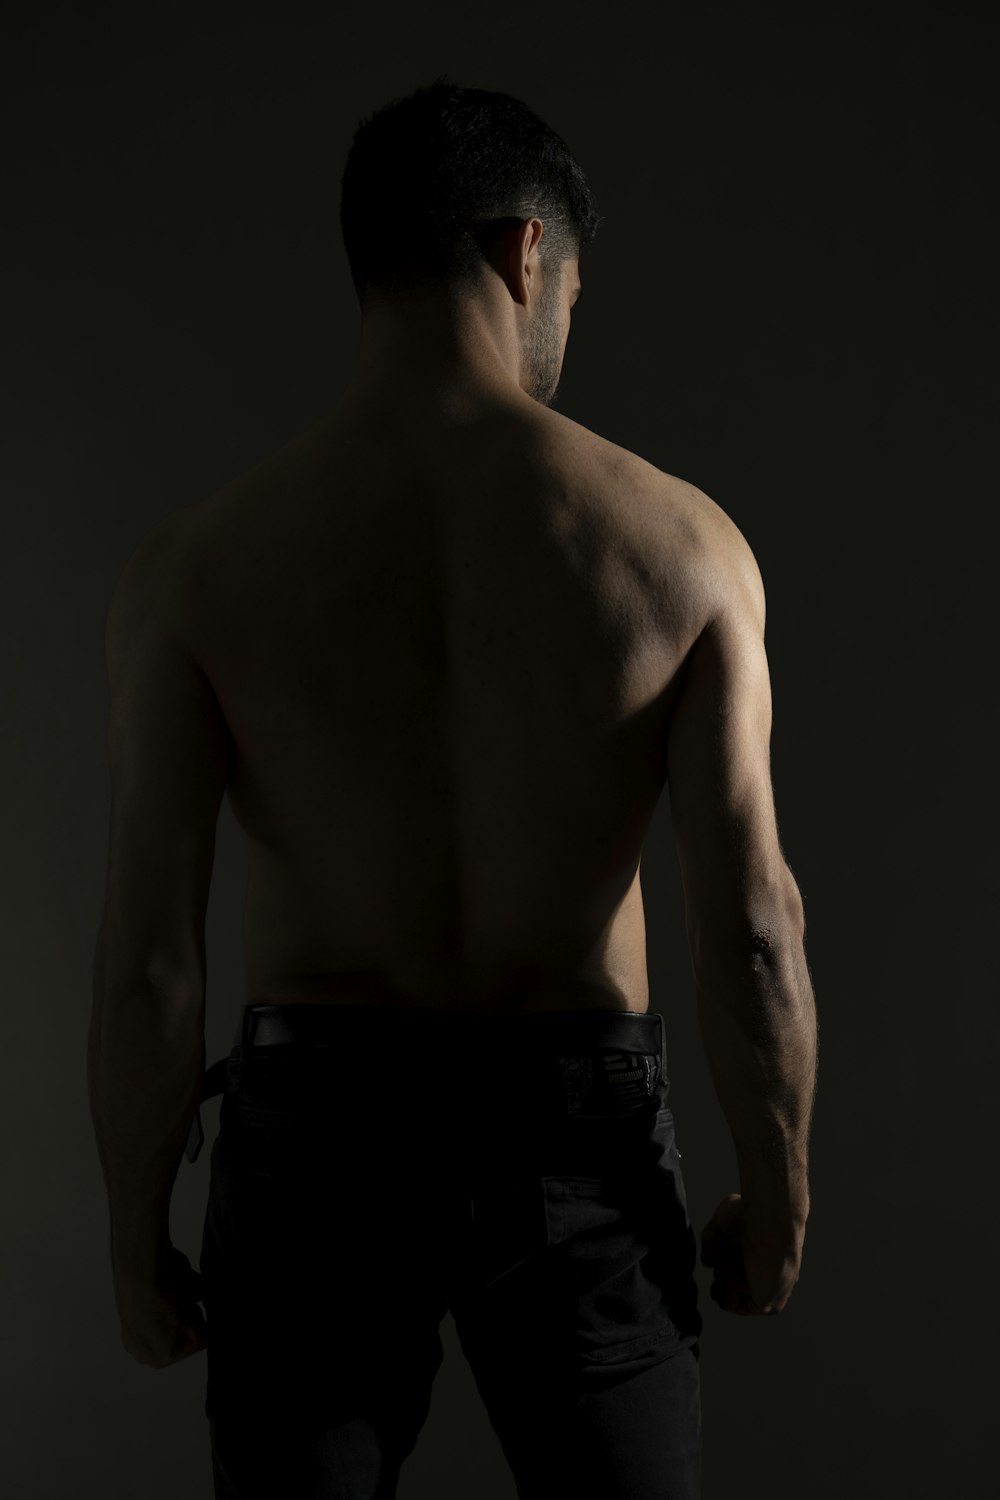 a shirtless man with no shirt standing in a dark room